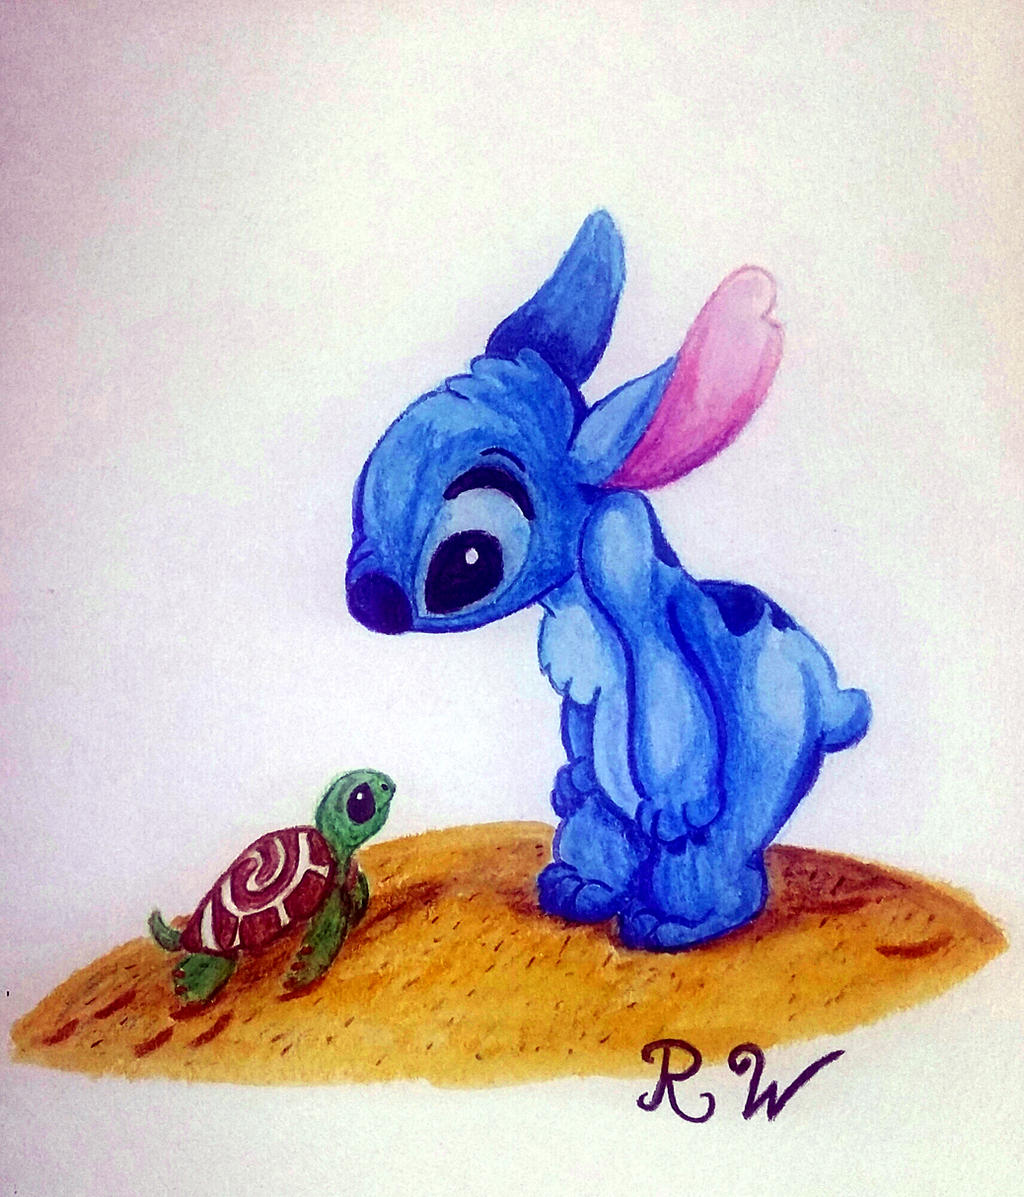 My Stitch things. 1 by MortenEng21 on DeviantArt